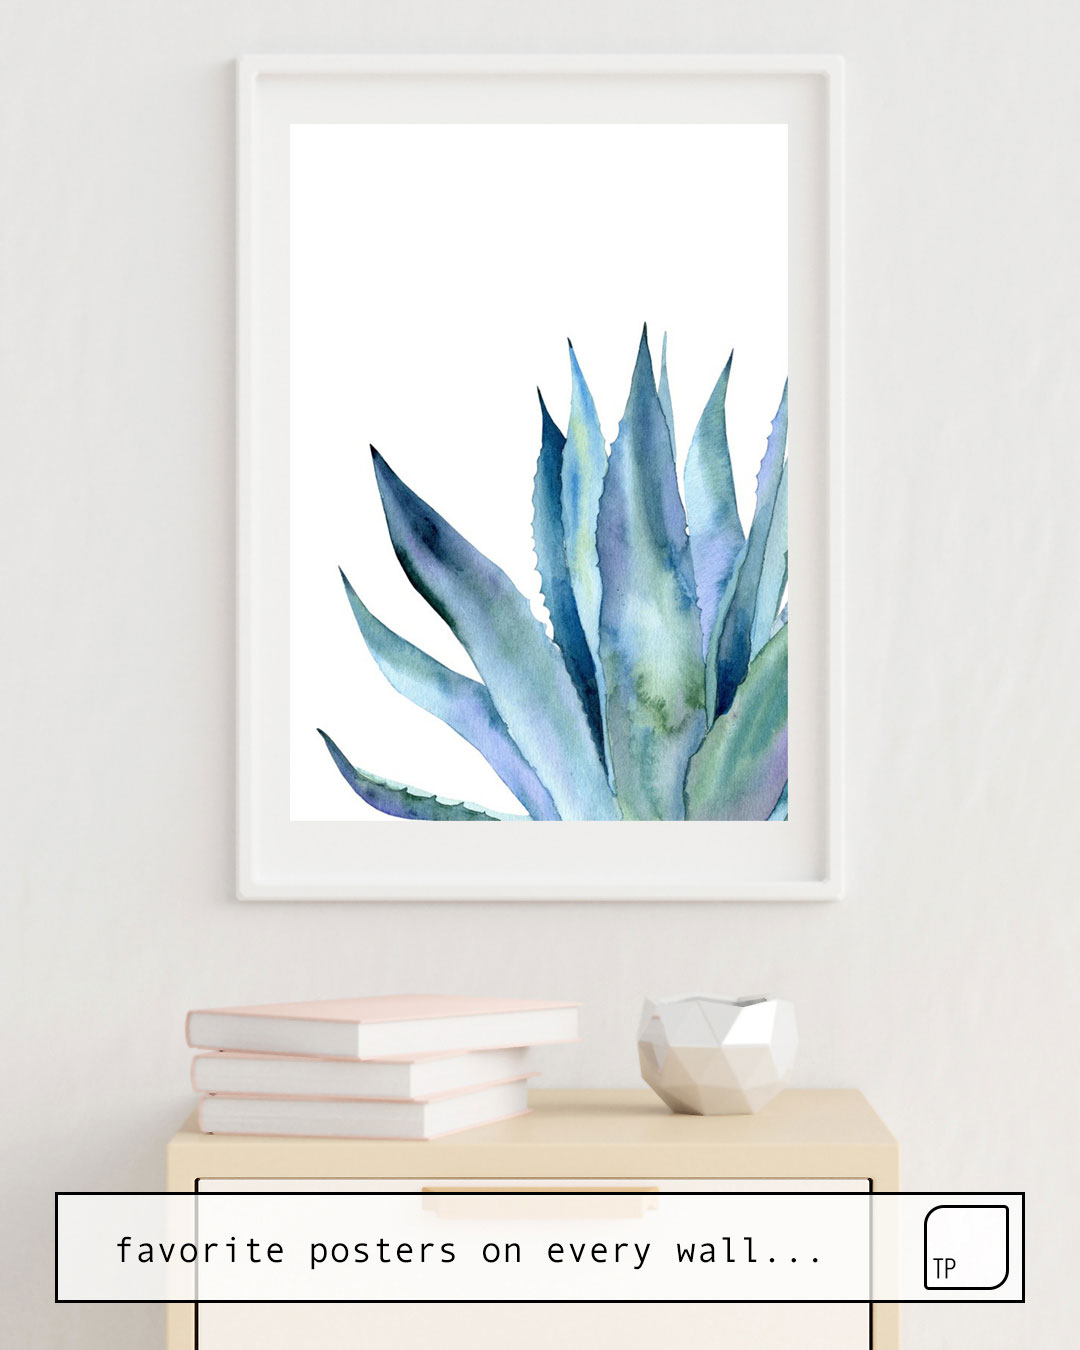 The photo shows an example of furnishing with the motif BLUE AGAVE PLANT. by Art by ASolo as mural